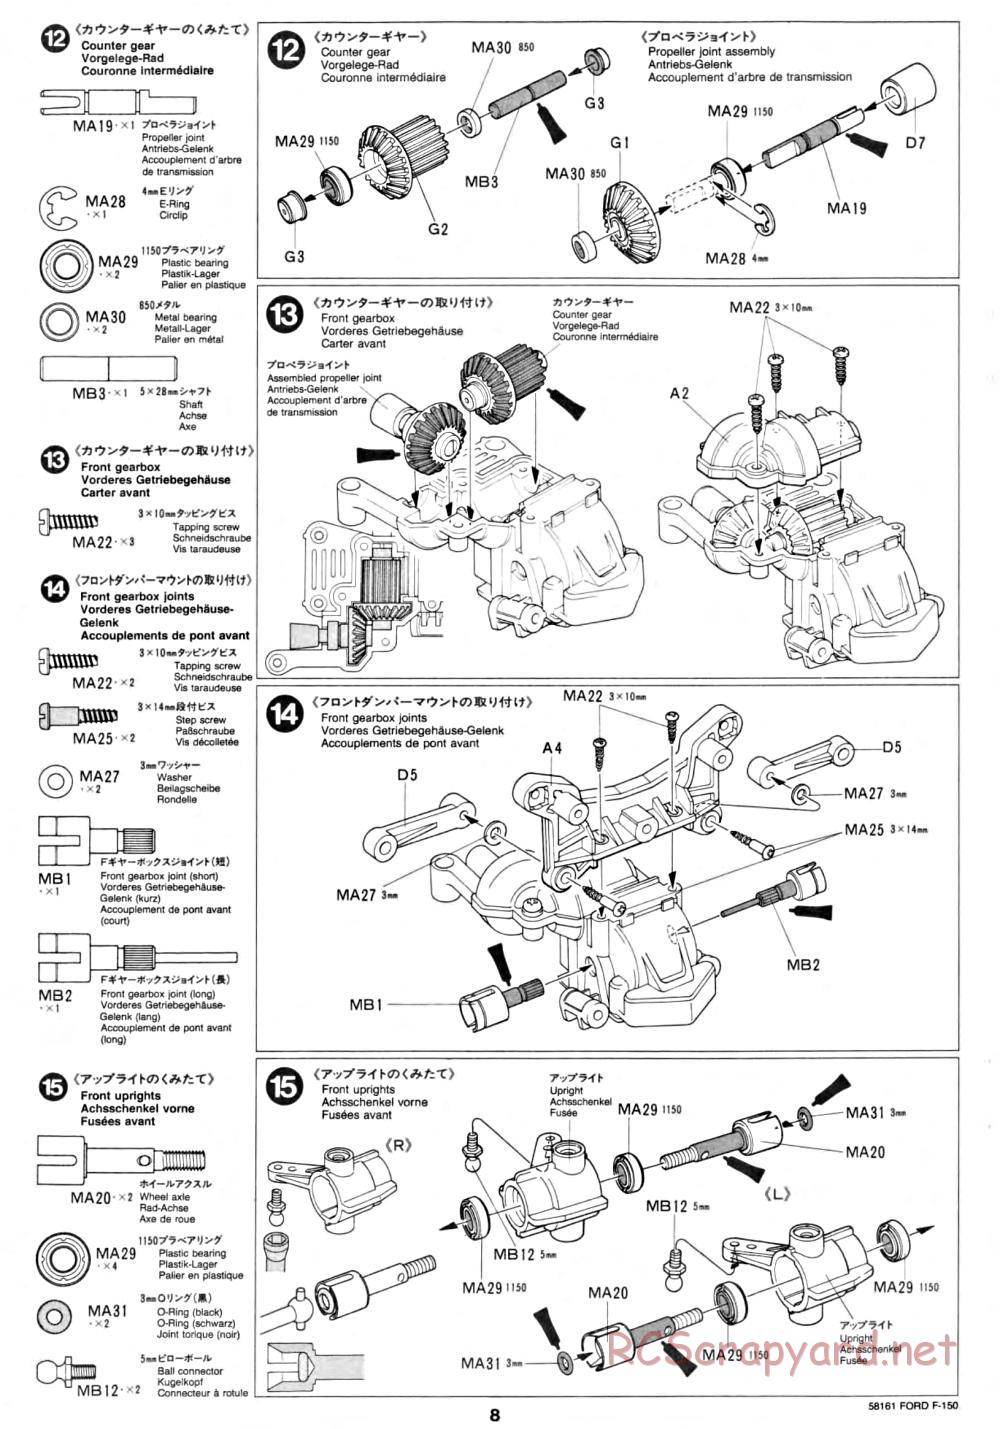 Tamiya - Ford F-150 Truck Chassis - Manual - Page 8